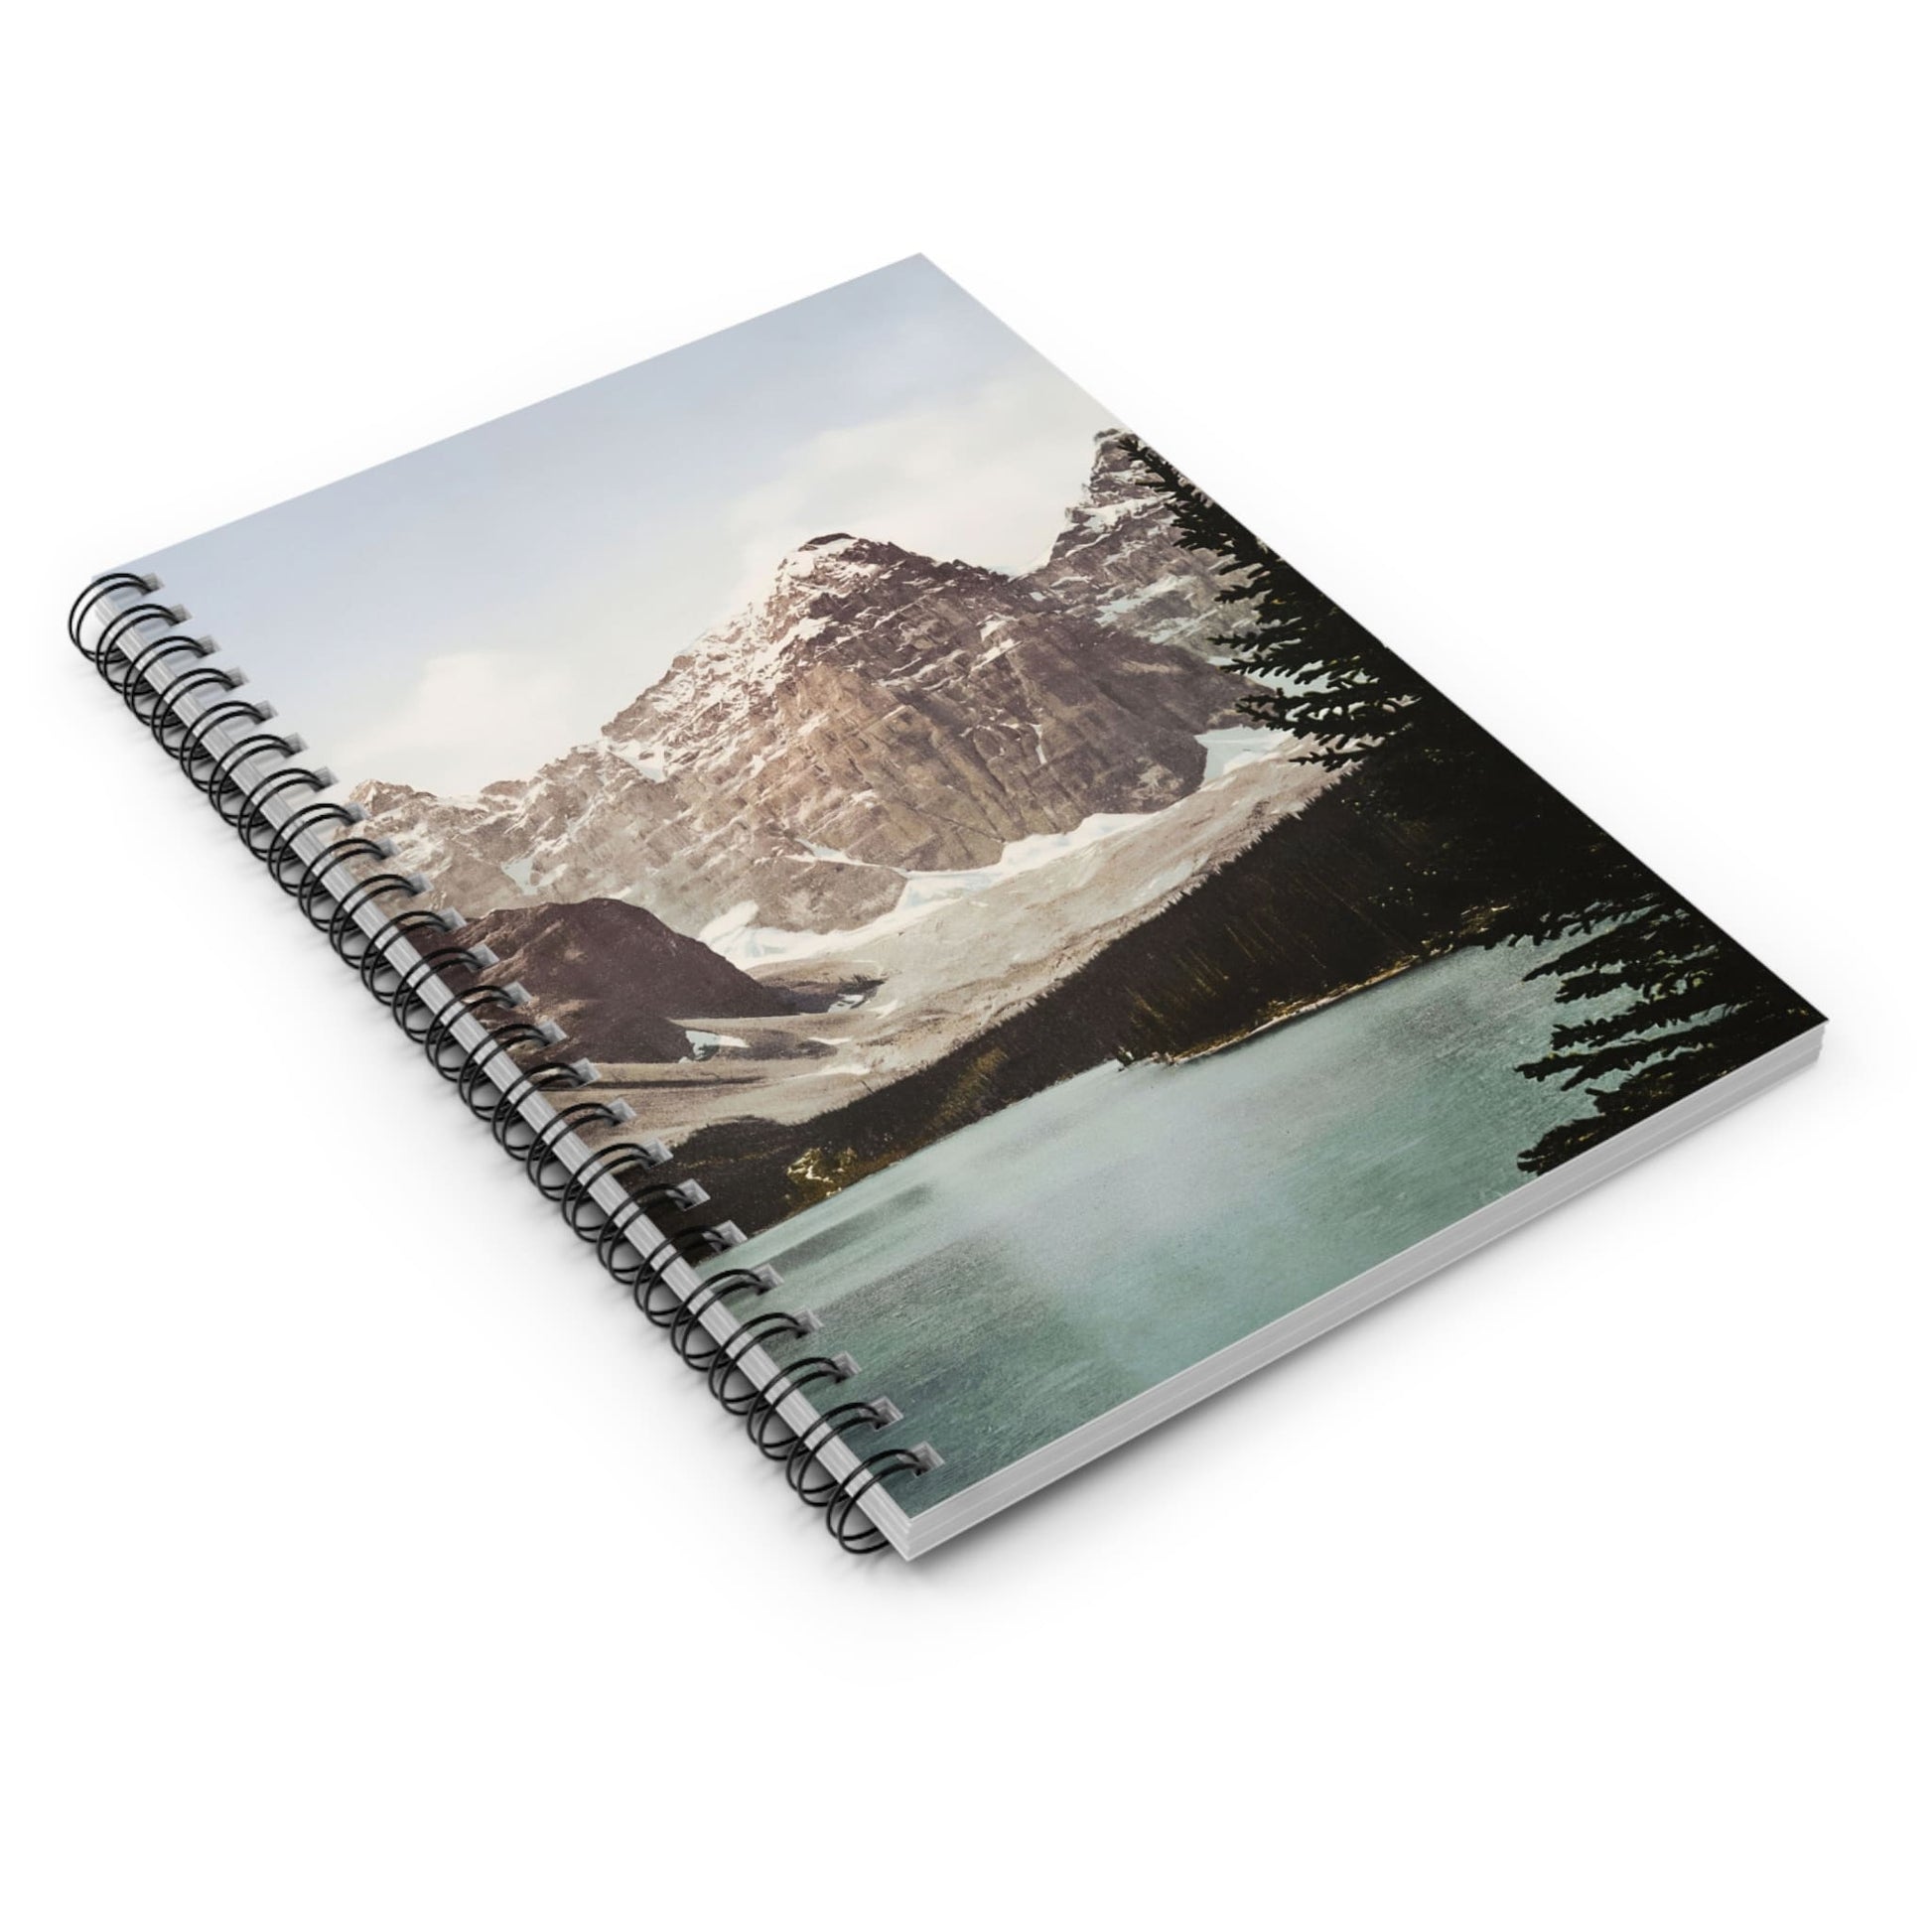 Banff National Park Spiral Notebook Laying Flat on White Surface